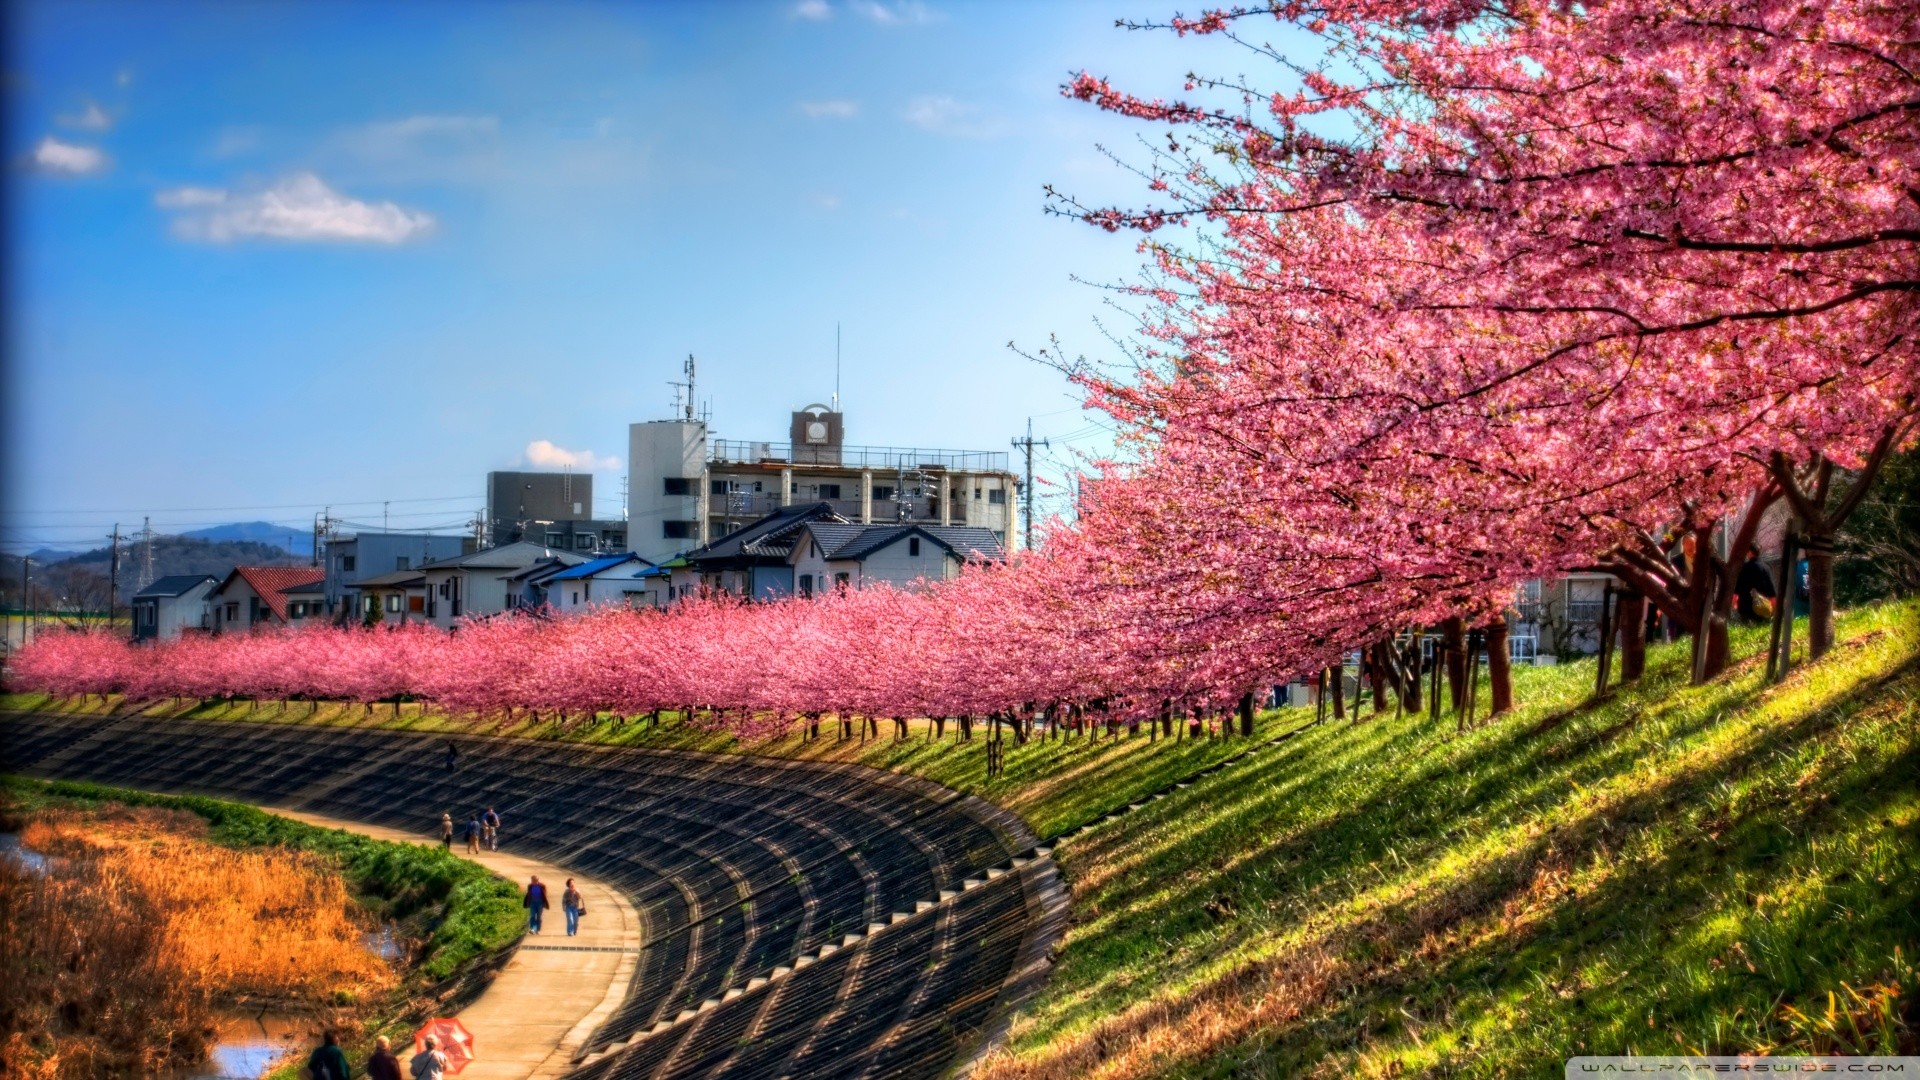 General 1920x1080 sky trees pink path cherry blossom Japan plants outdoors watermarked